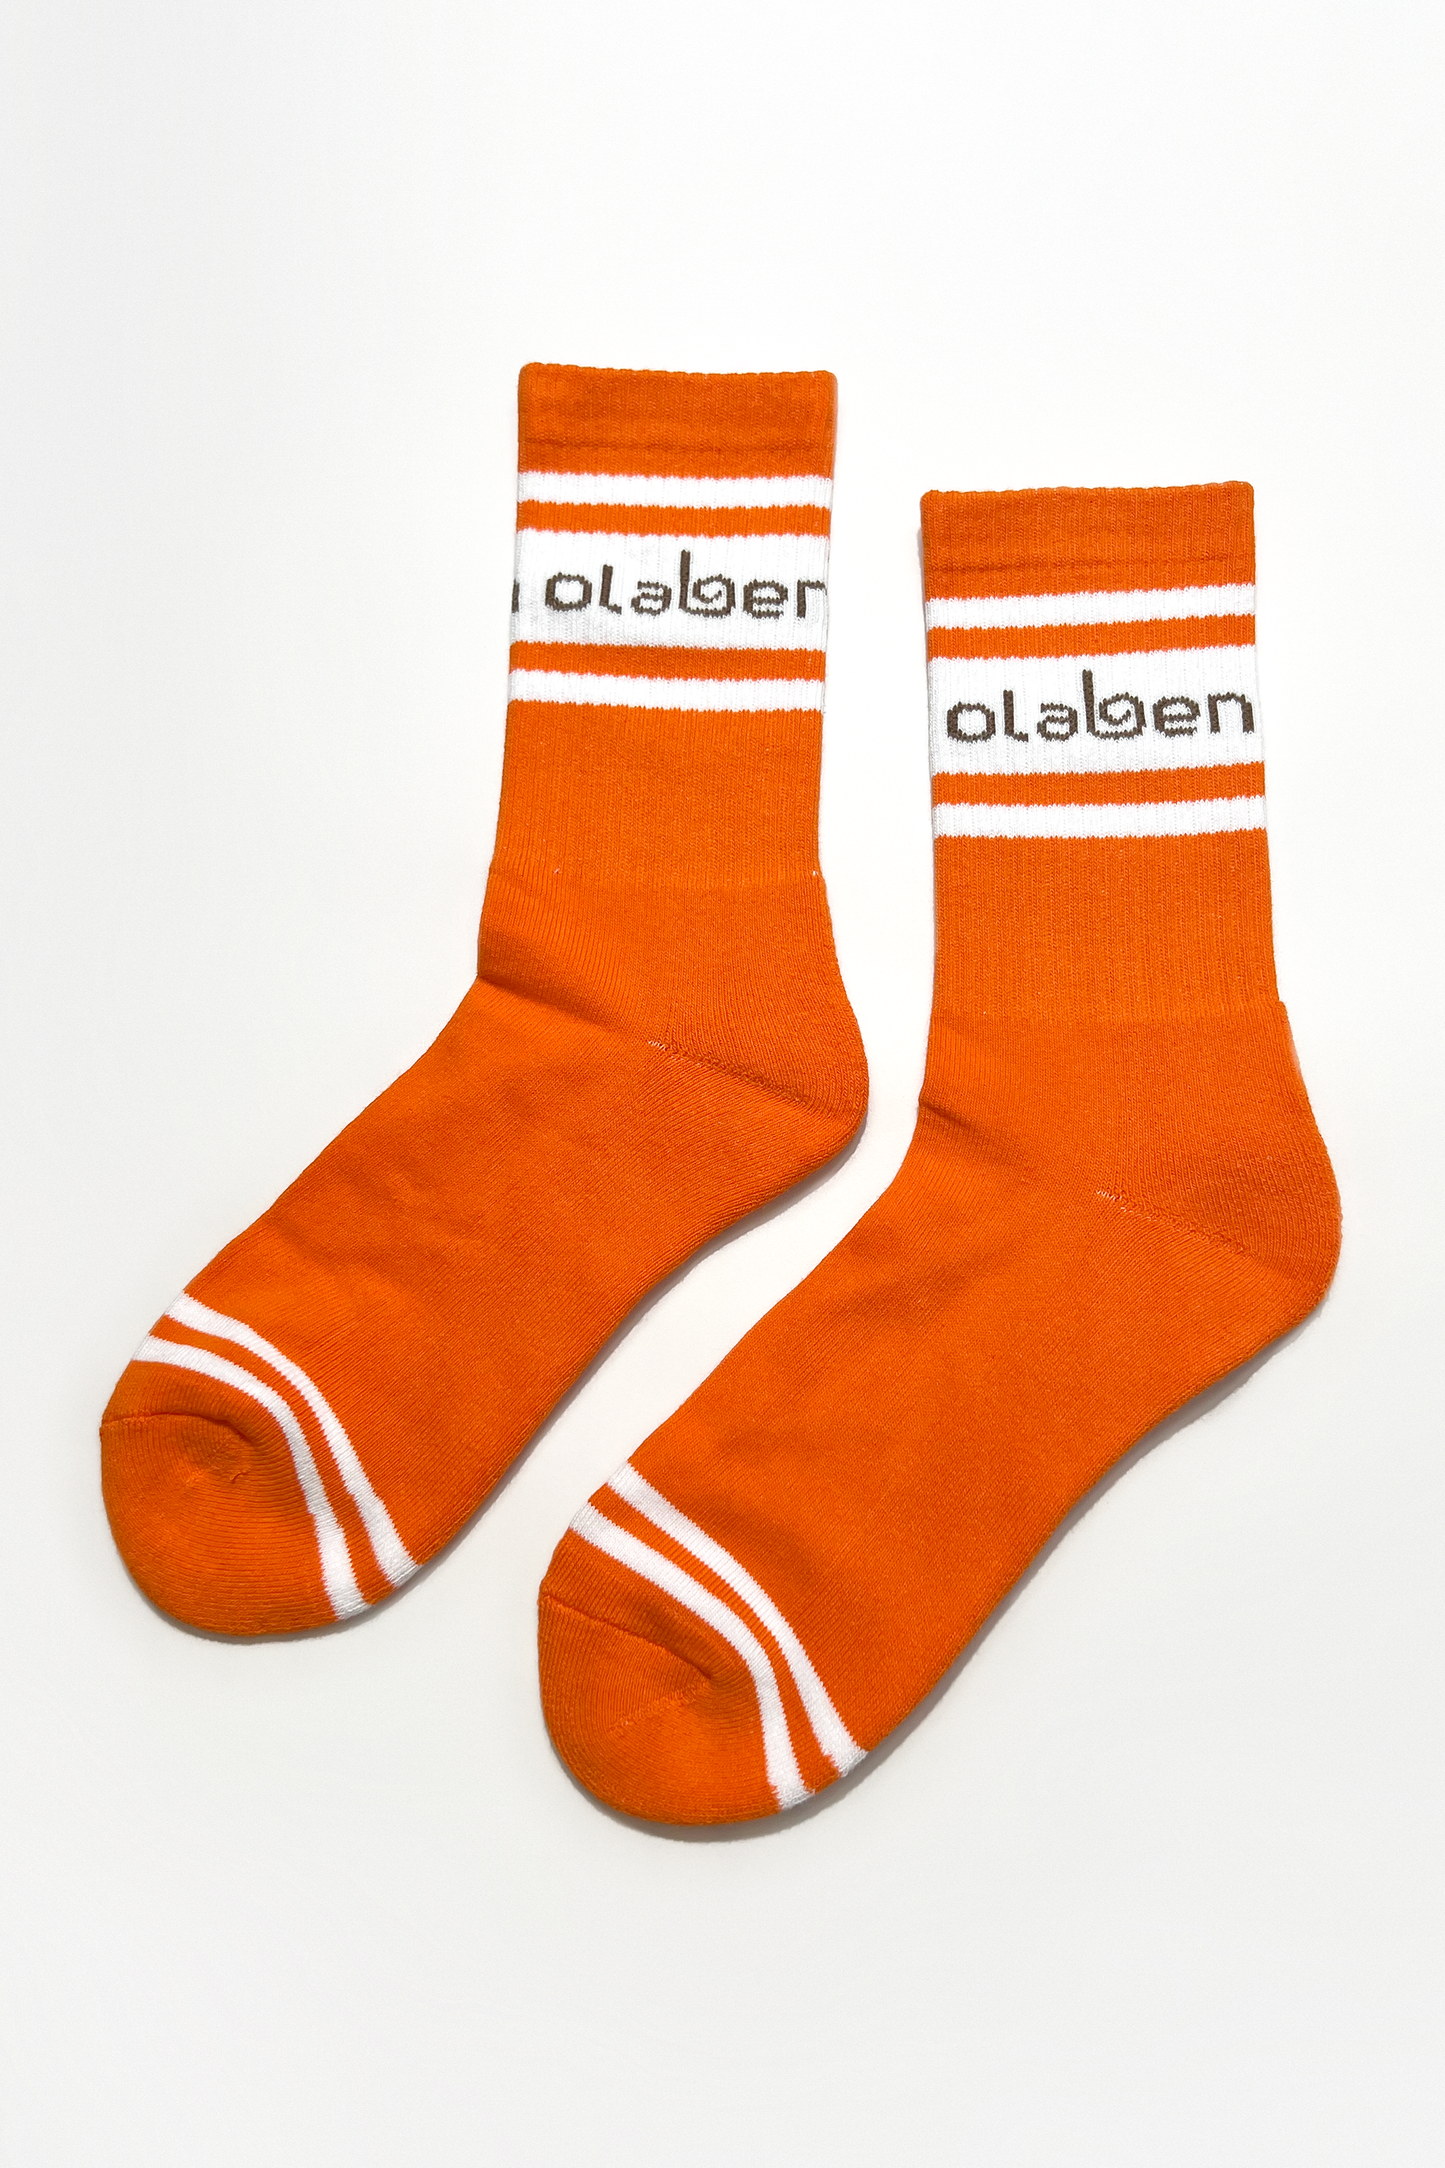 Colorful assortment of cozy quarter socks in sunrise orange, perfect for everyday wear.